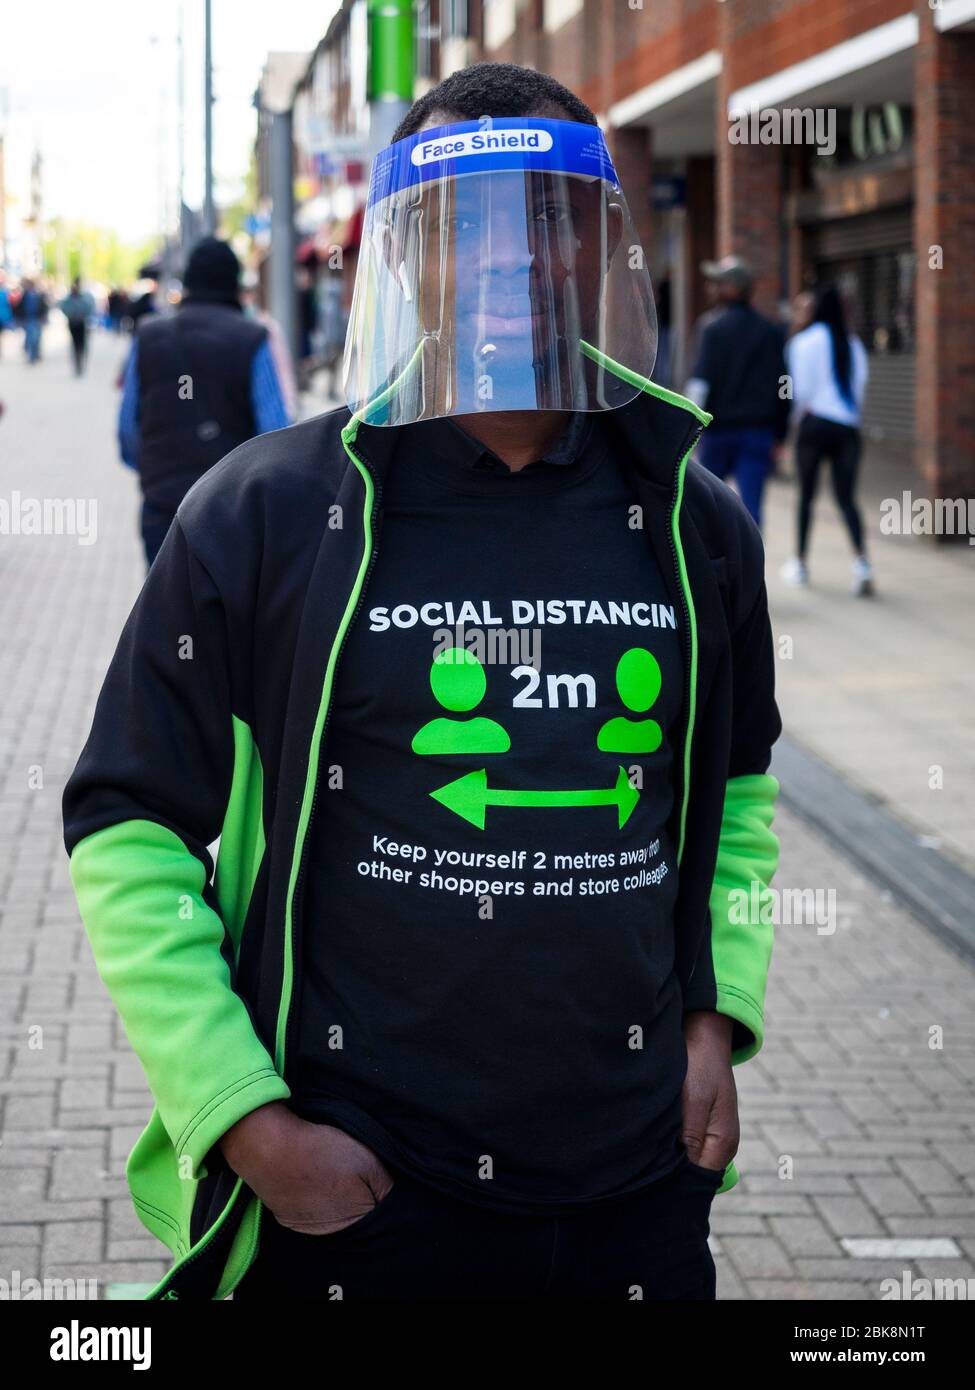 Walthamstow. London. UK. May the 2nd, 2020. Close-up of Essential Worker with face shield and social distancing t-shirt. This guy works in Asda Superm Stock Photo